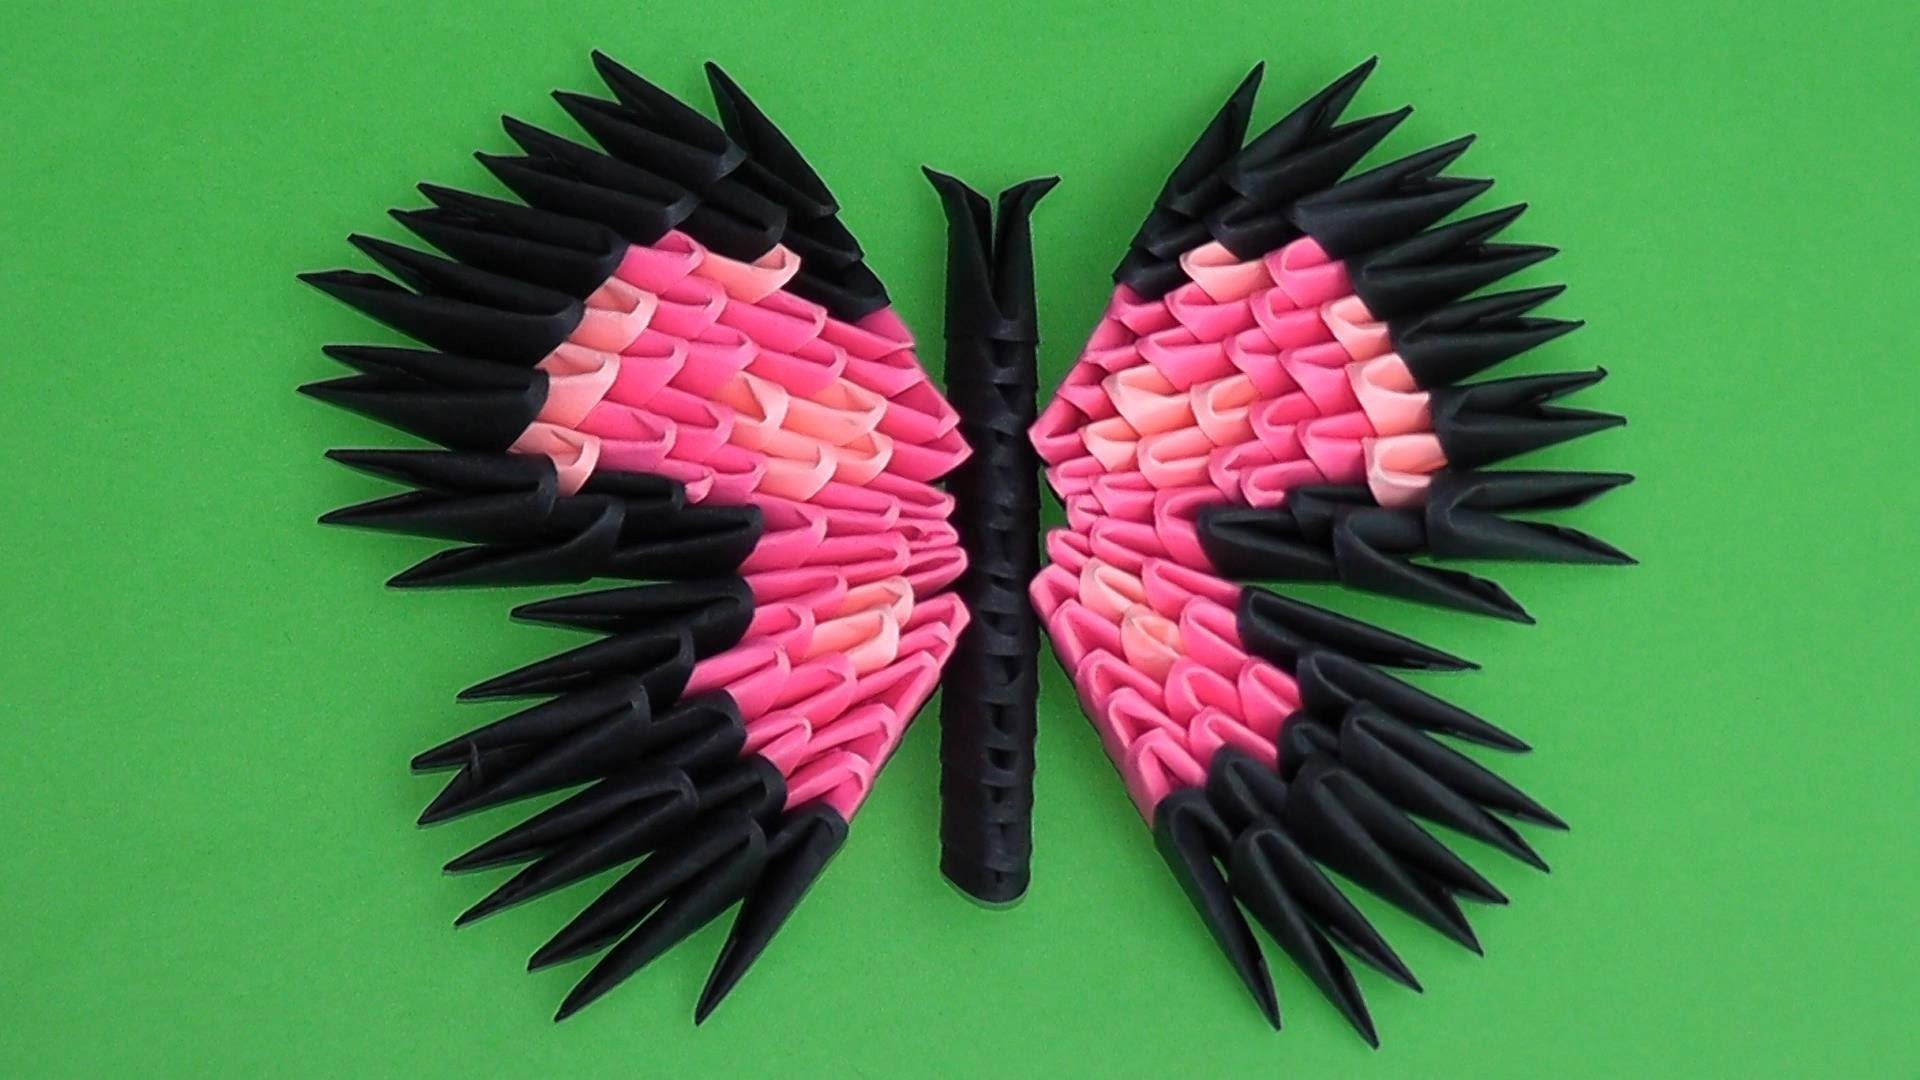 How To Make 3D Origami Butterfly 3d Origami Butterfly Assembly Diagram Tutorial Instructions Variant 3